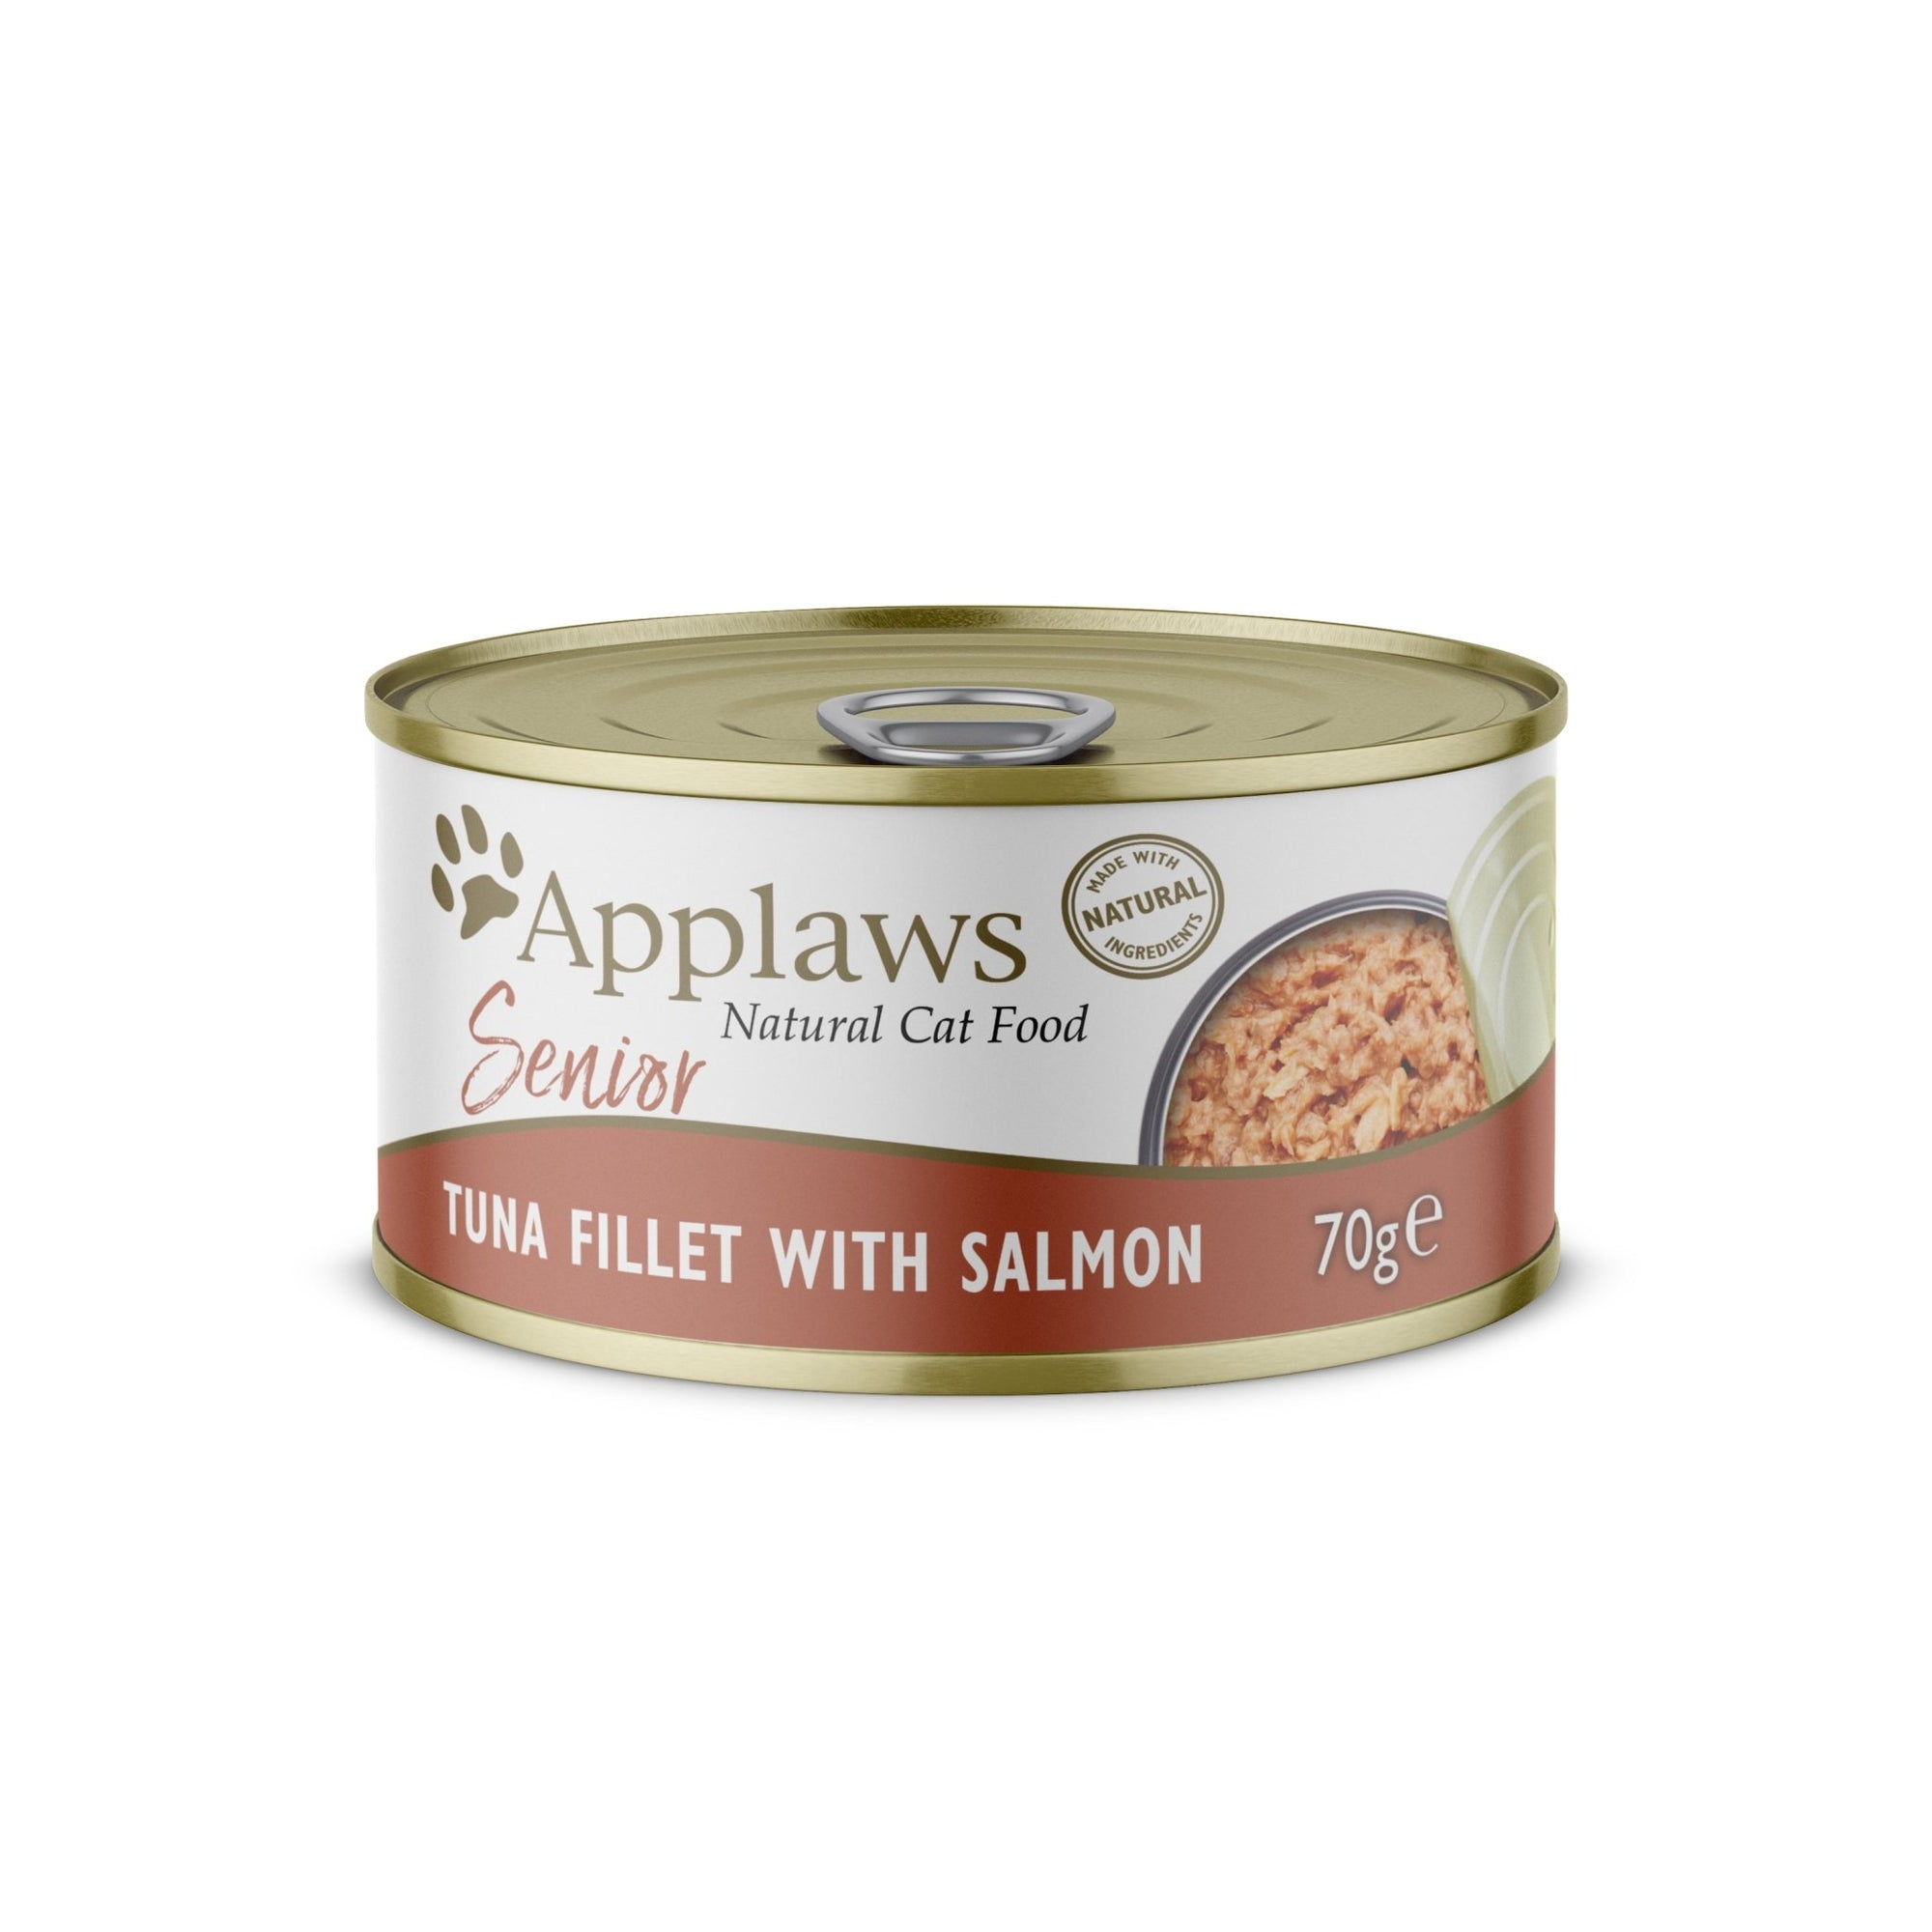 Applaws Cats Senior Tuna Fillets with Salmon Tins 24 x 70g, Applaws,